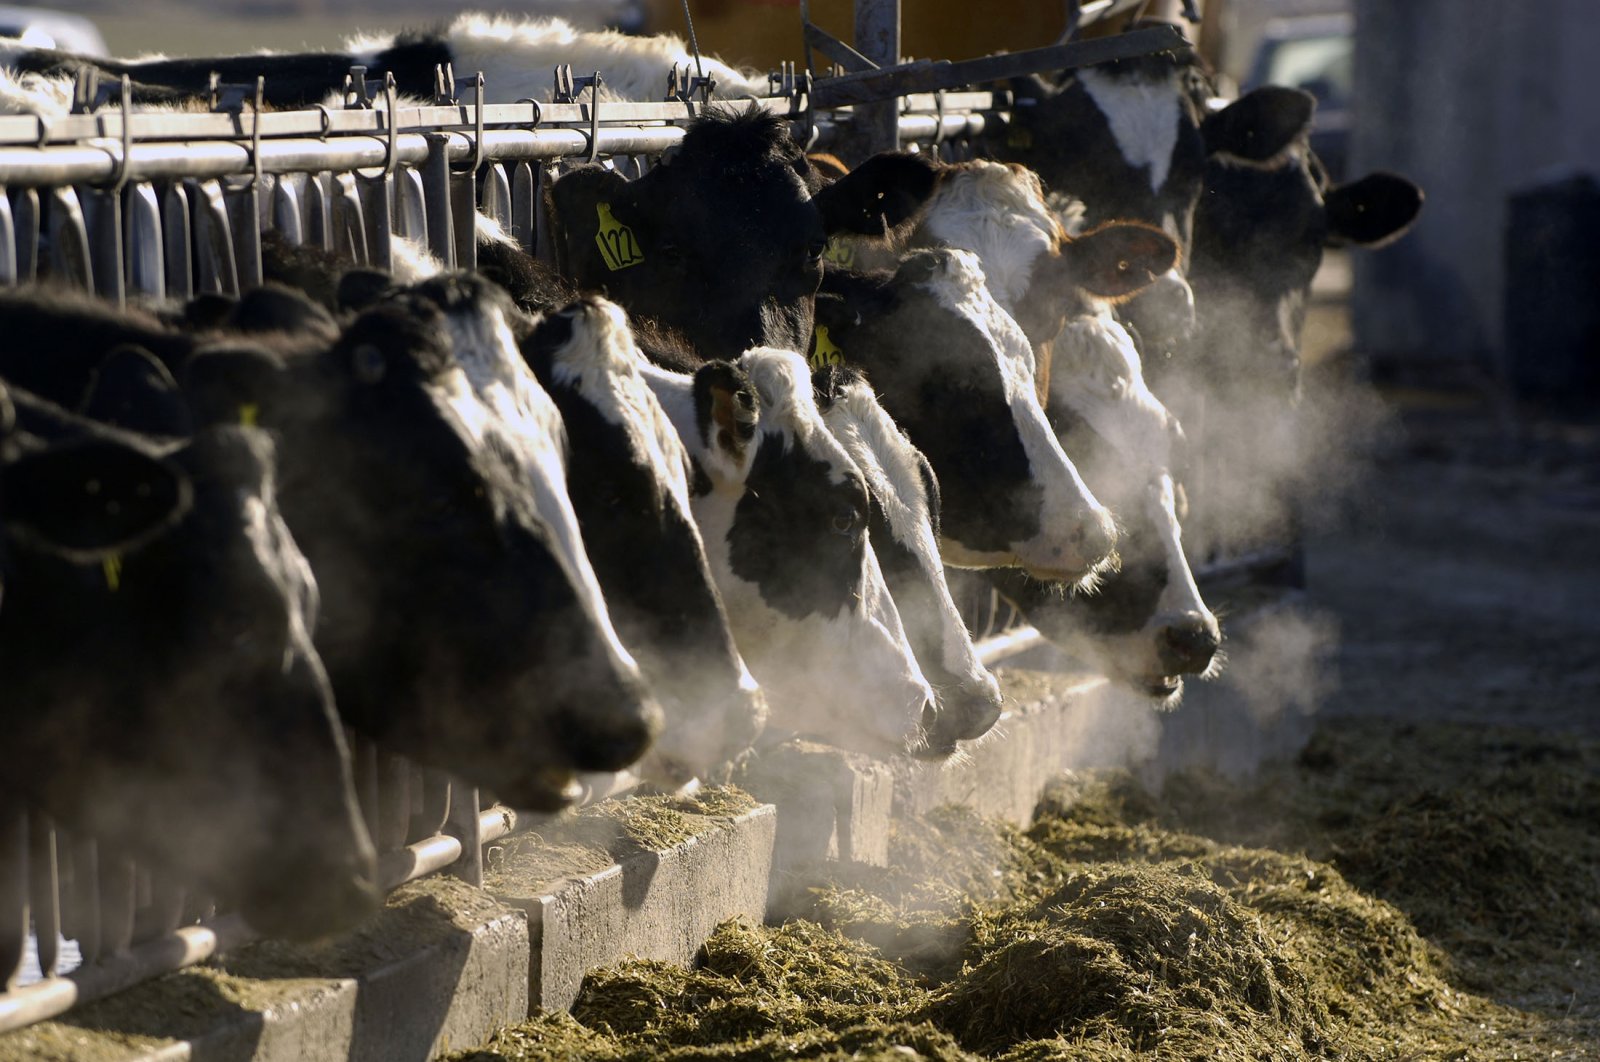 A line of Holstein dairy cows feeds through a fence at a dairy farm, outside Jerome, Idaho, U.S., March 11, 2009. (AP File Photo)